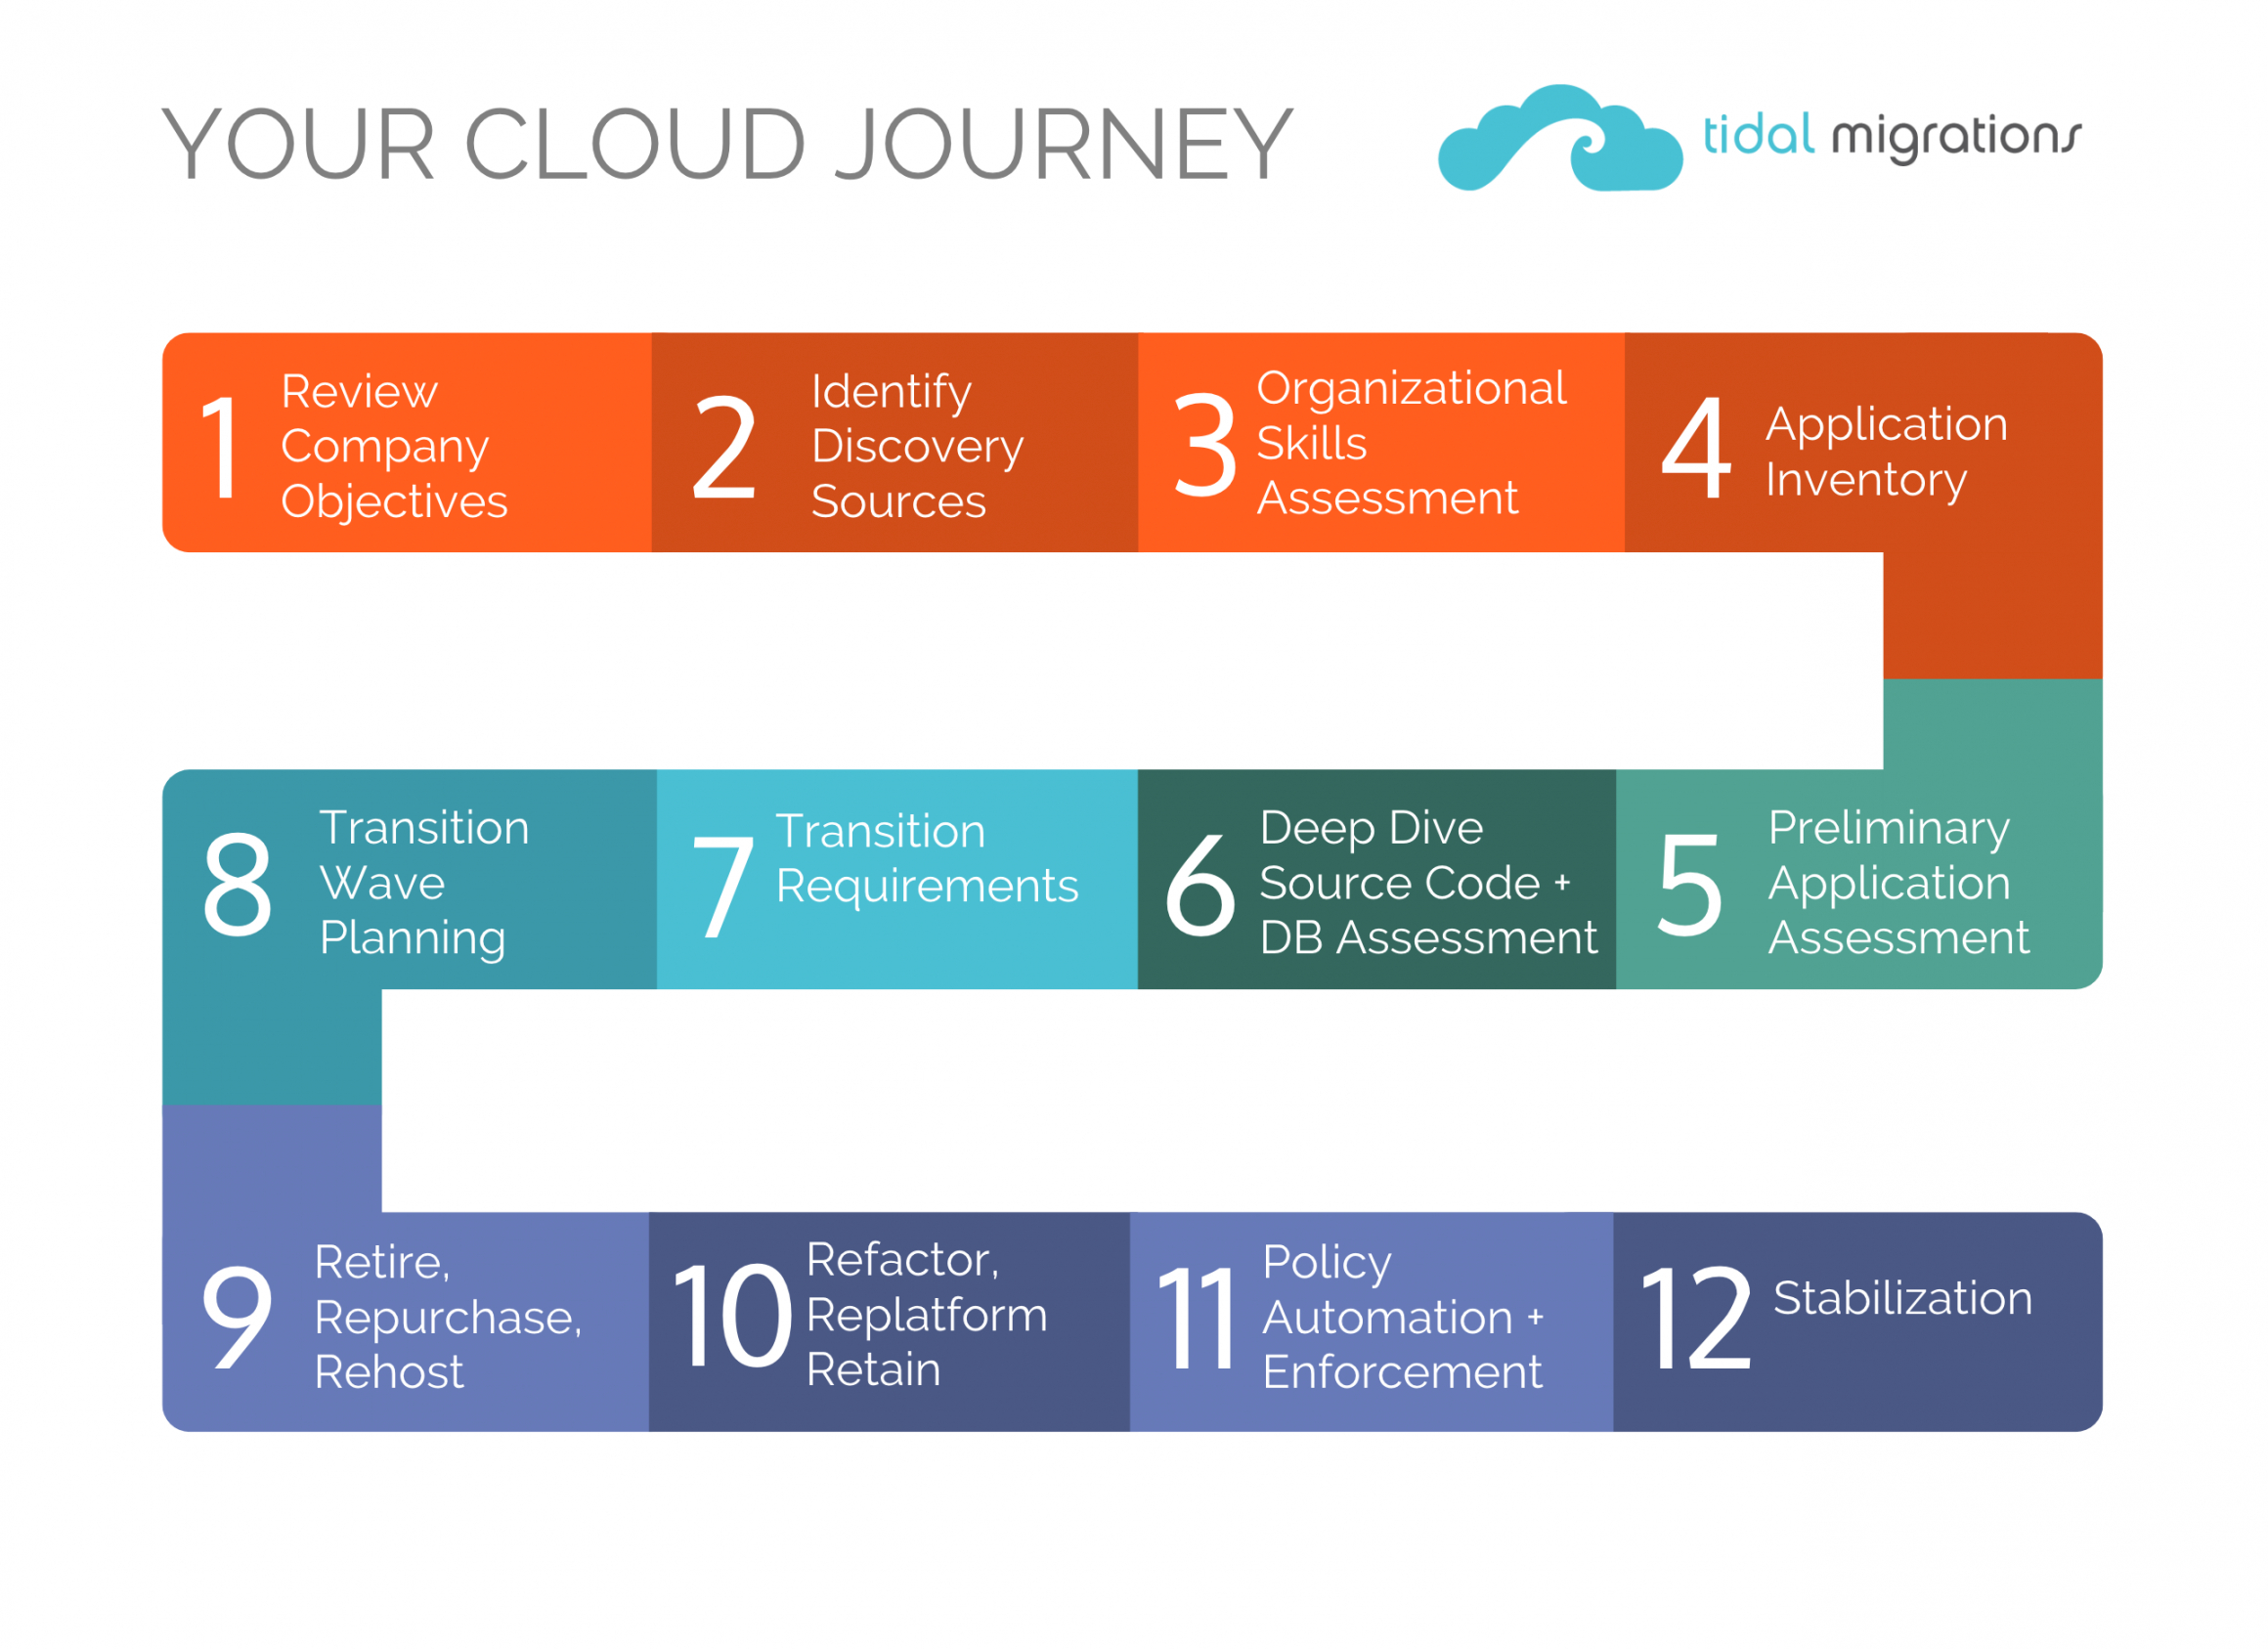  A diagram of the steps involved in a cloud migration journey, from discovery and assessment to implementation and stabilization.